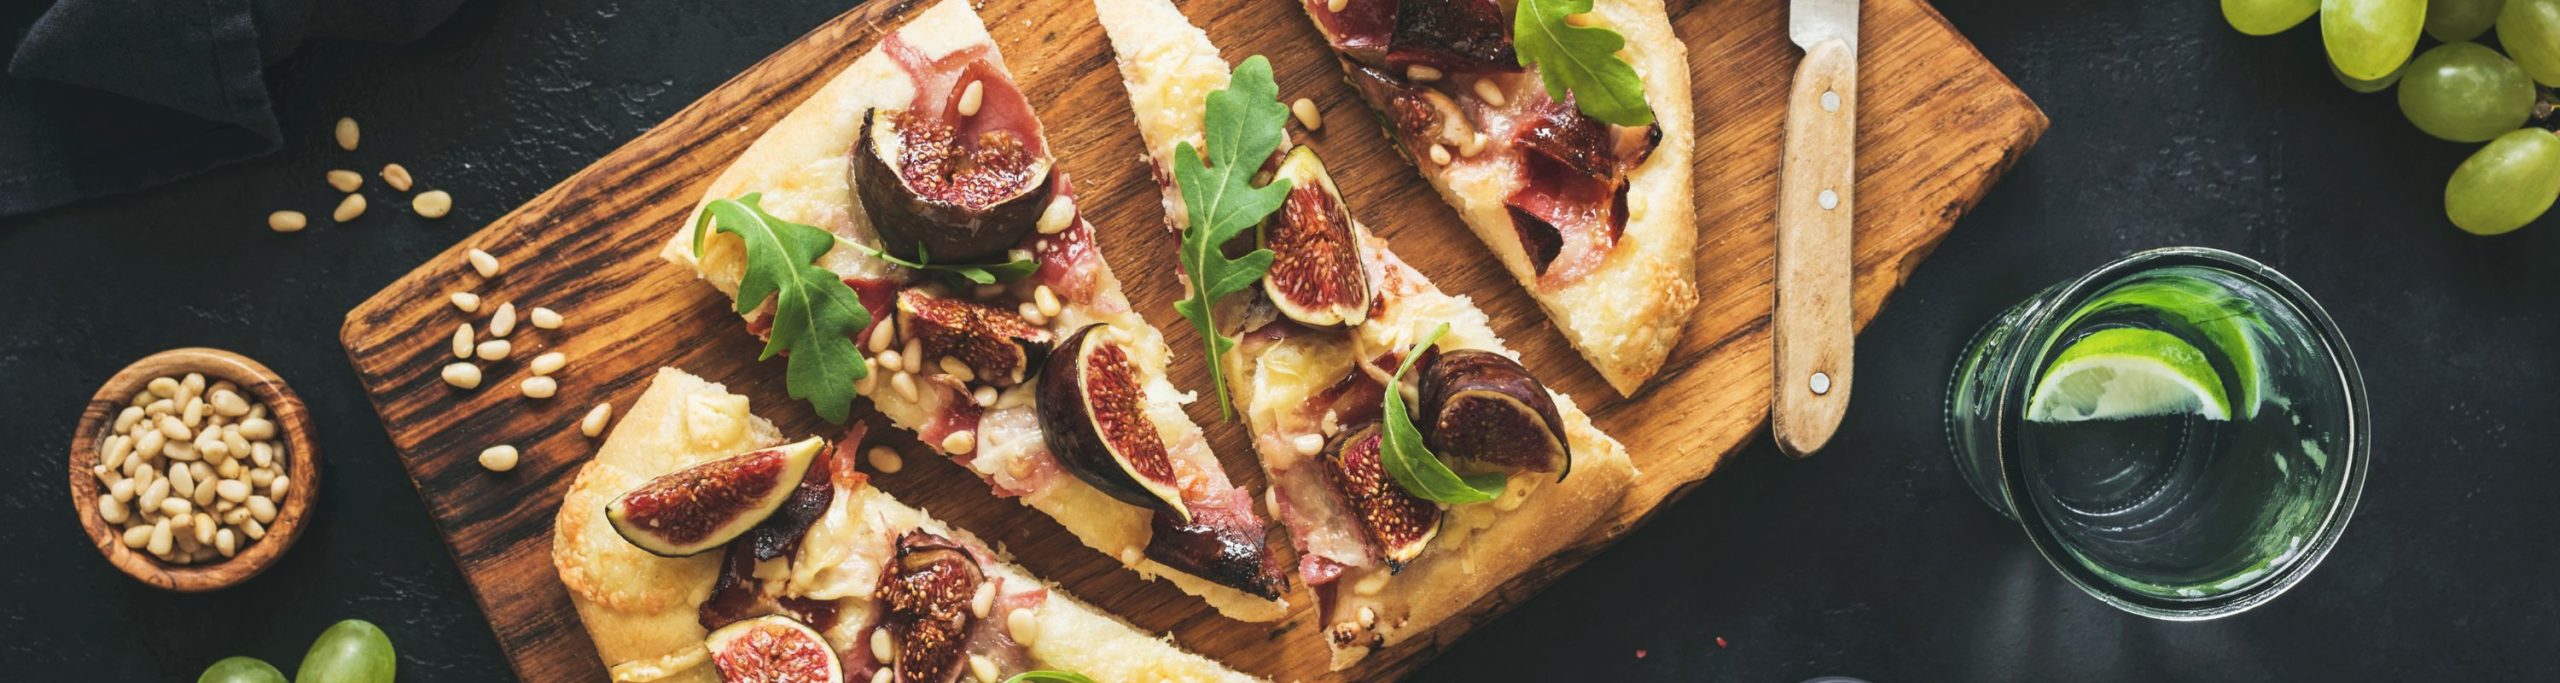 Food & Drink San Diego--Image of charcuterie board with pizza